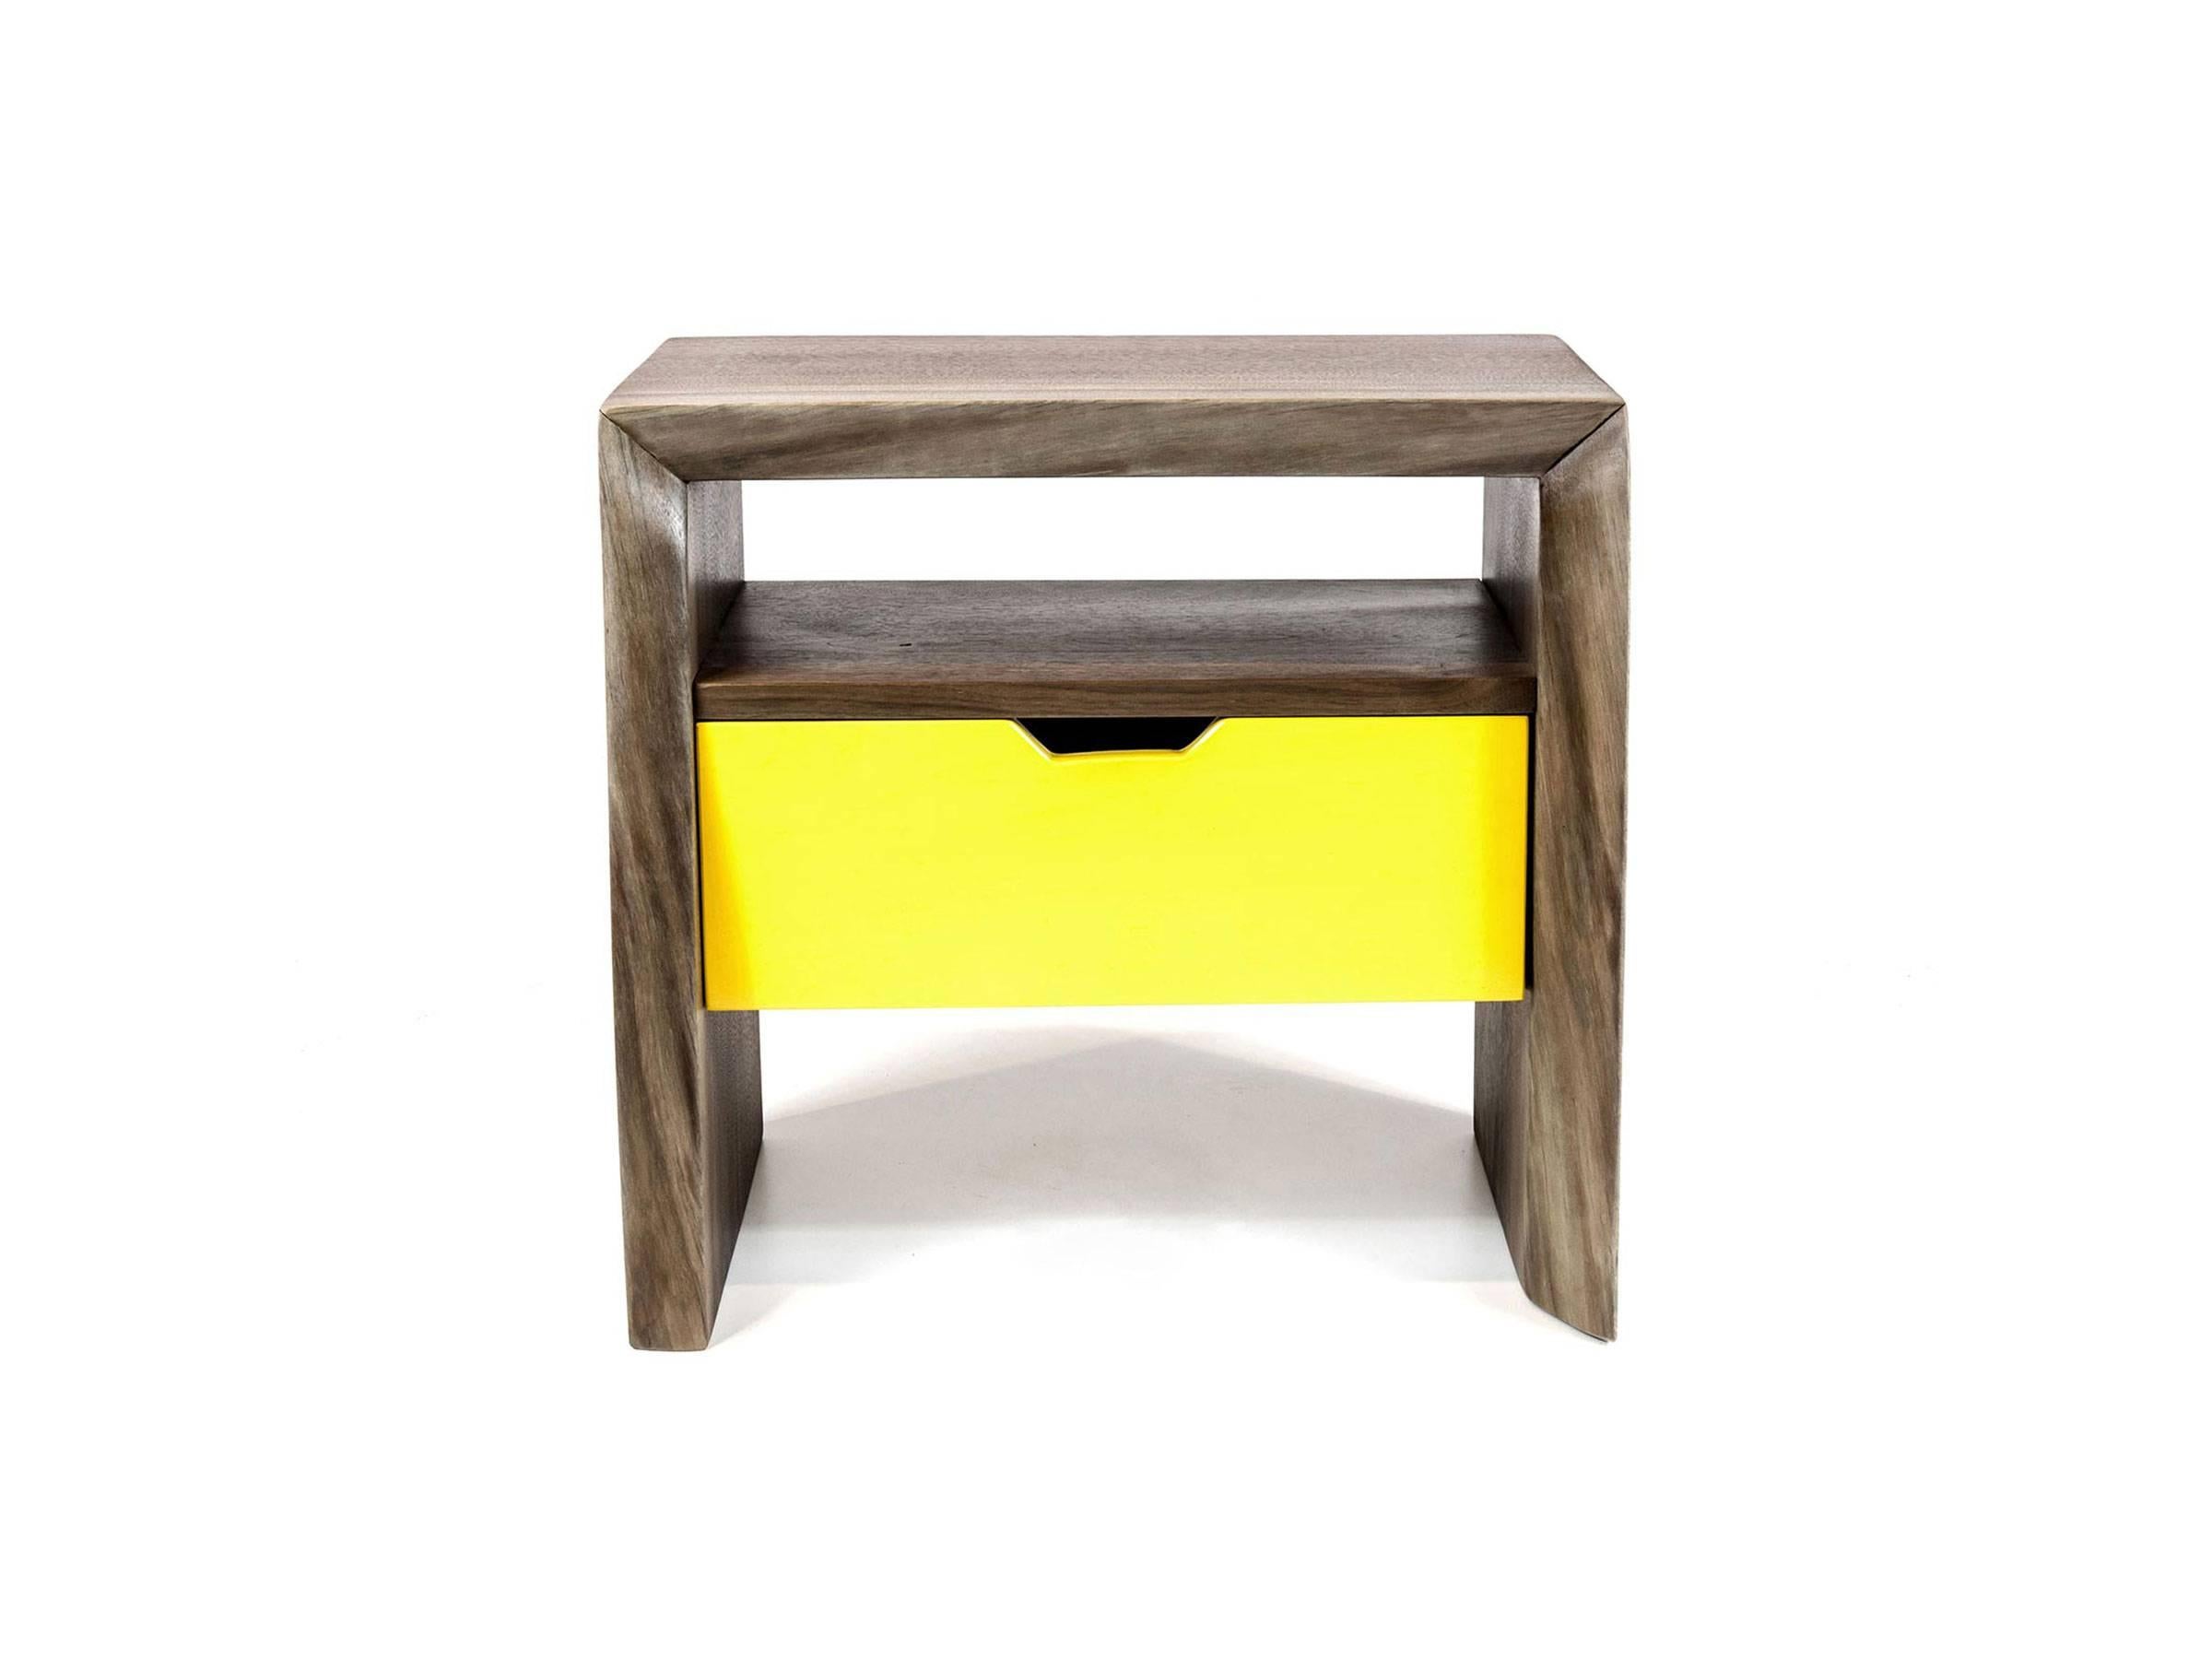 The SHIMNA live nightstand features a mitered live-edge board on the three facing edges, and a painted drawer with an angled mission-style pull. Here it's shown in Pennsylvanian black walnut finished in a clear water based polyurethane.

Designed